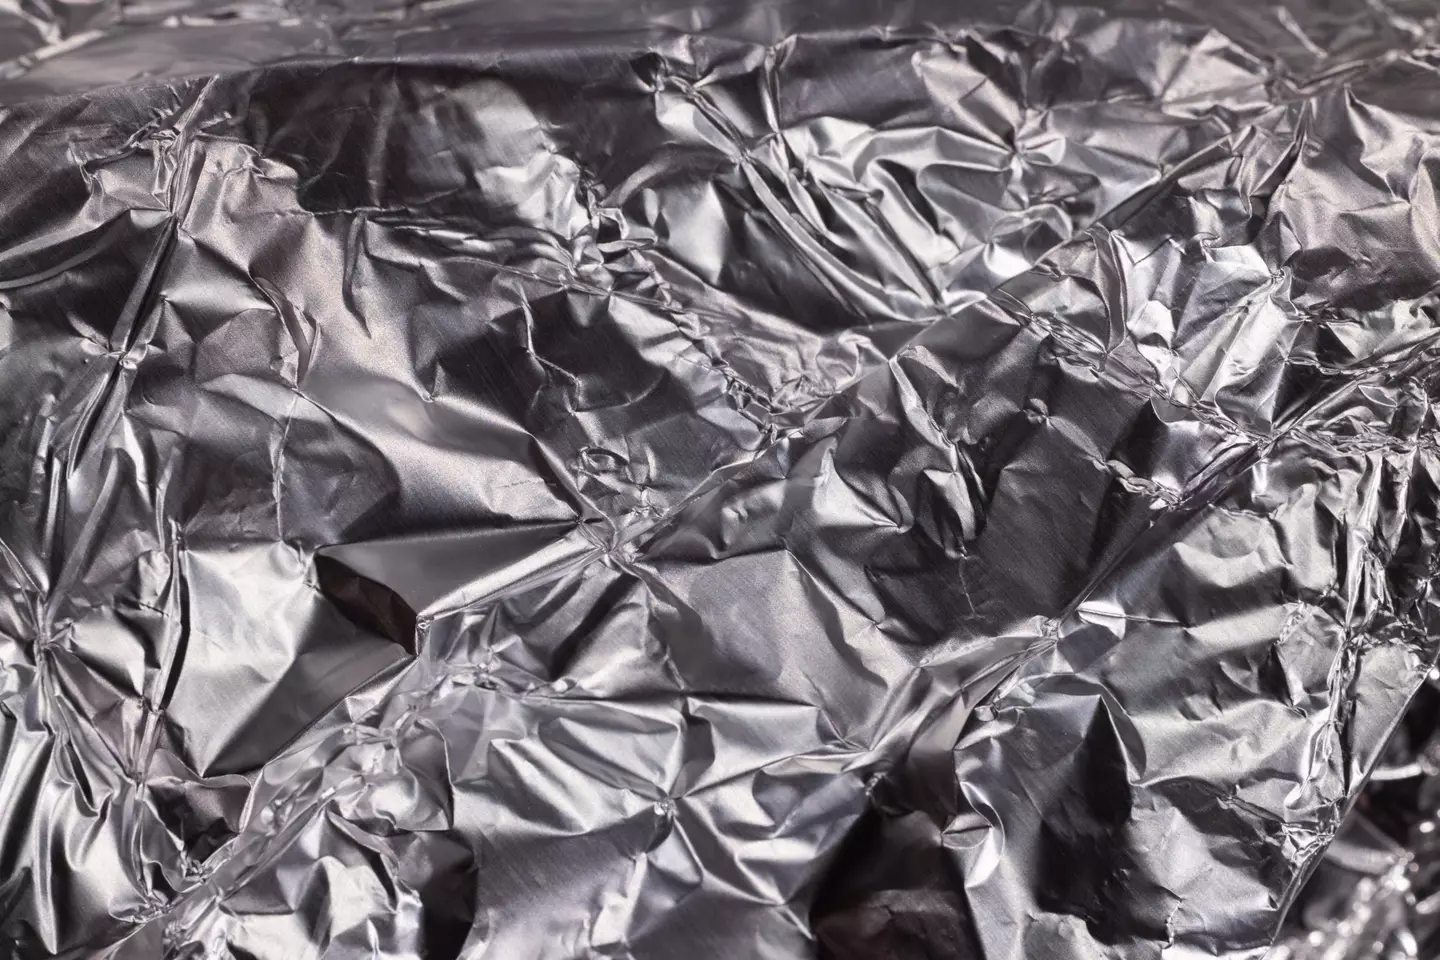 You may have noticed foil has a shiny side and a dull side.